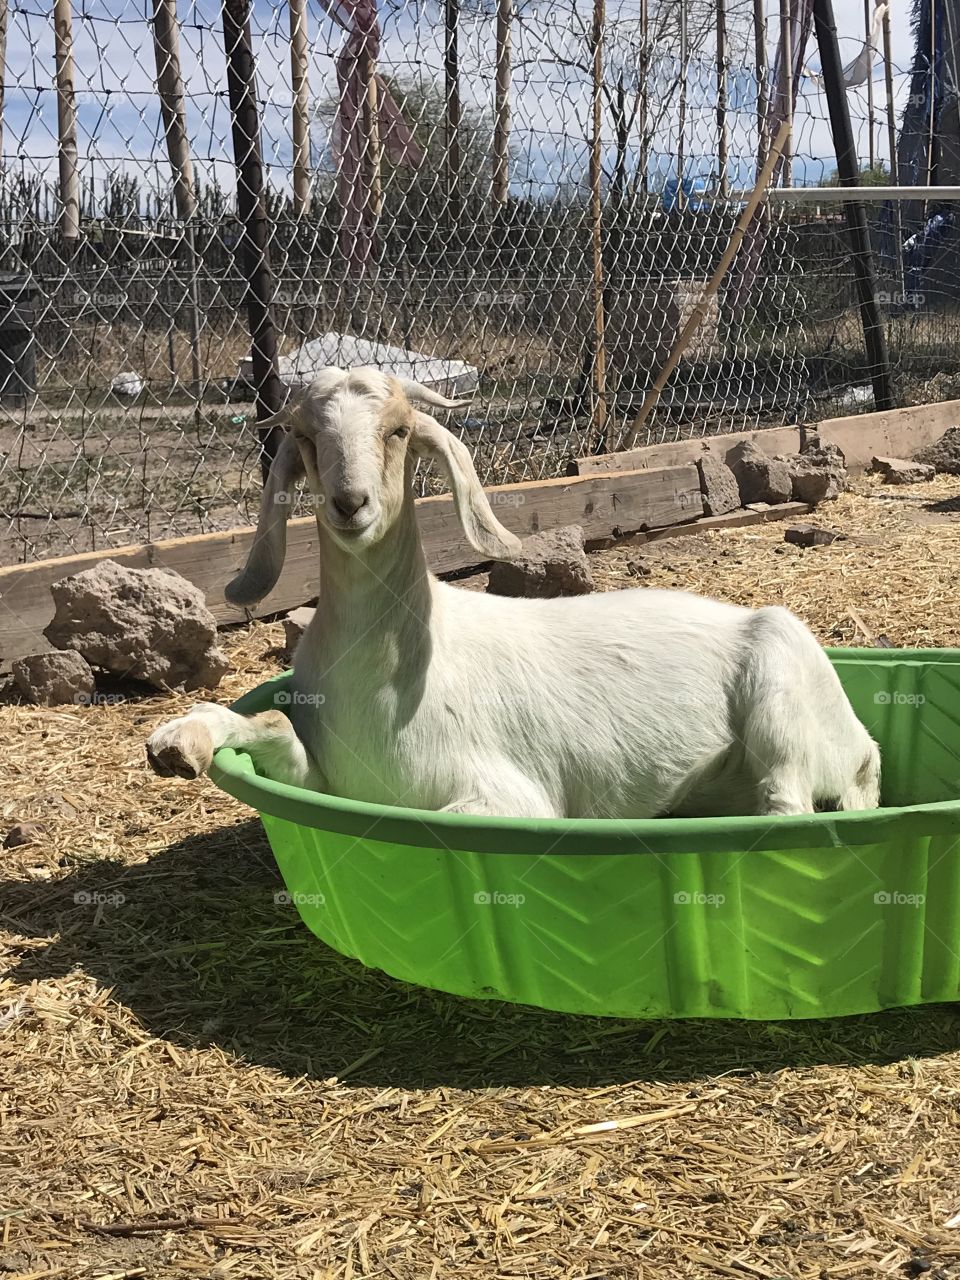 Miss Echo, our community garden goat, loves to chill out in the kiddy pool on a hot summer day! 